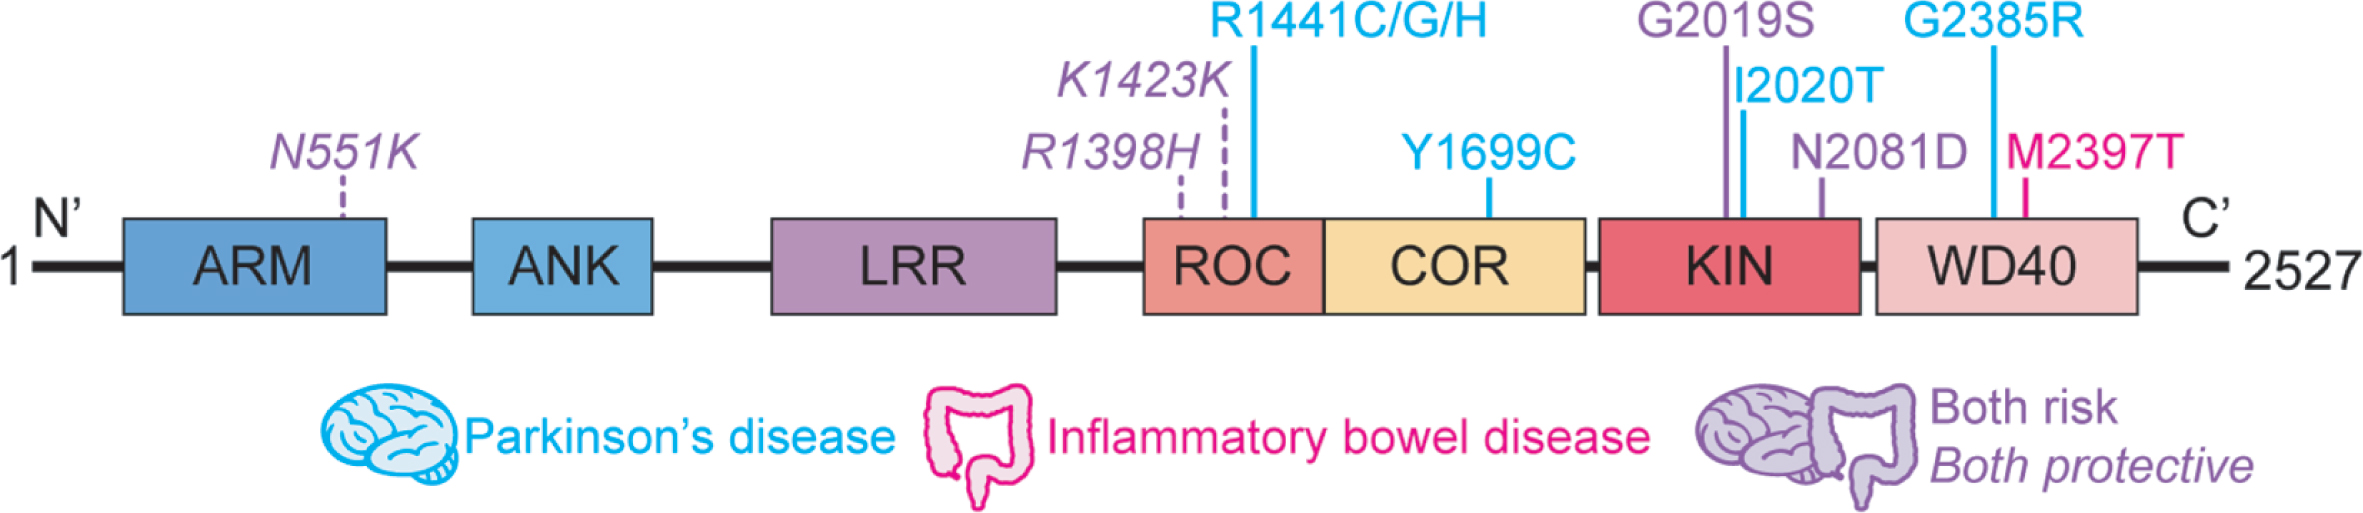 Schematic representation of LRRK2 domain structure. Respective locations of the amino acid substitutions previously linked to Parkinson’s disease and inflammatory bowel disease are shown. ARM, armadillo; ANK, ankyrin repeat region; LRR, leucine-rich repeat; ROC, Ras of complex proteins; COR, C terminal of ROC; KIN, mitogen-activated protein kinase; WD40, WD40 protein-protein interaction domain.